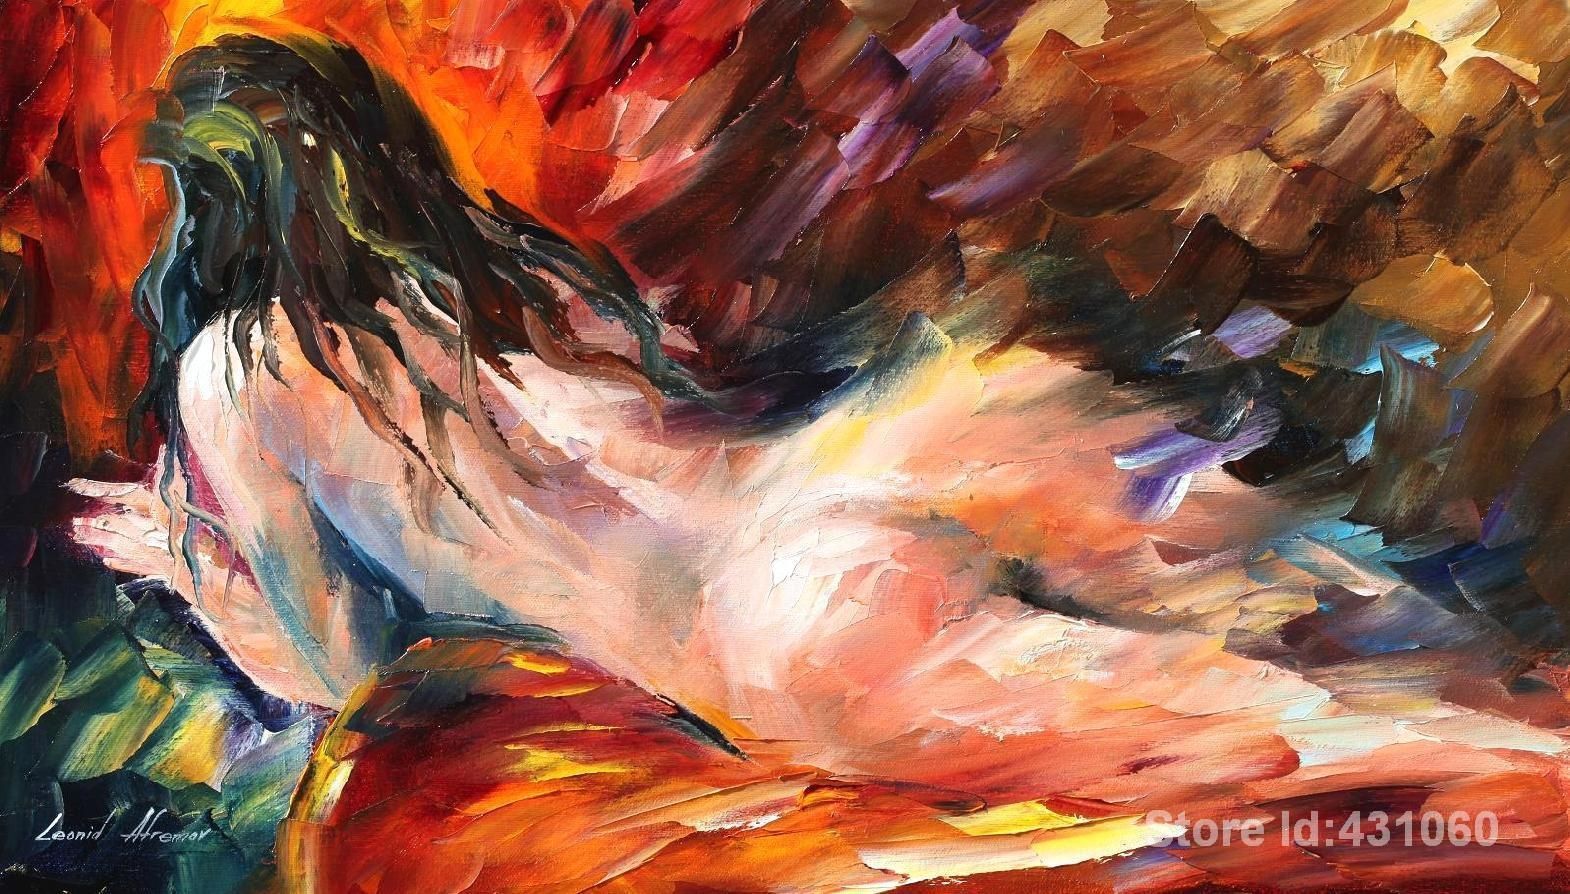 Sensual Artwork Etsy Sensual Paintings For The Bedroom ~ Cryp Intended For Sensual Wall Art (Photo 14 of 20)